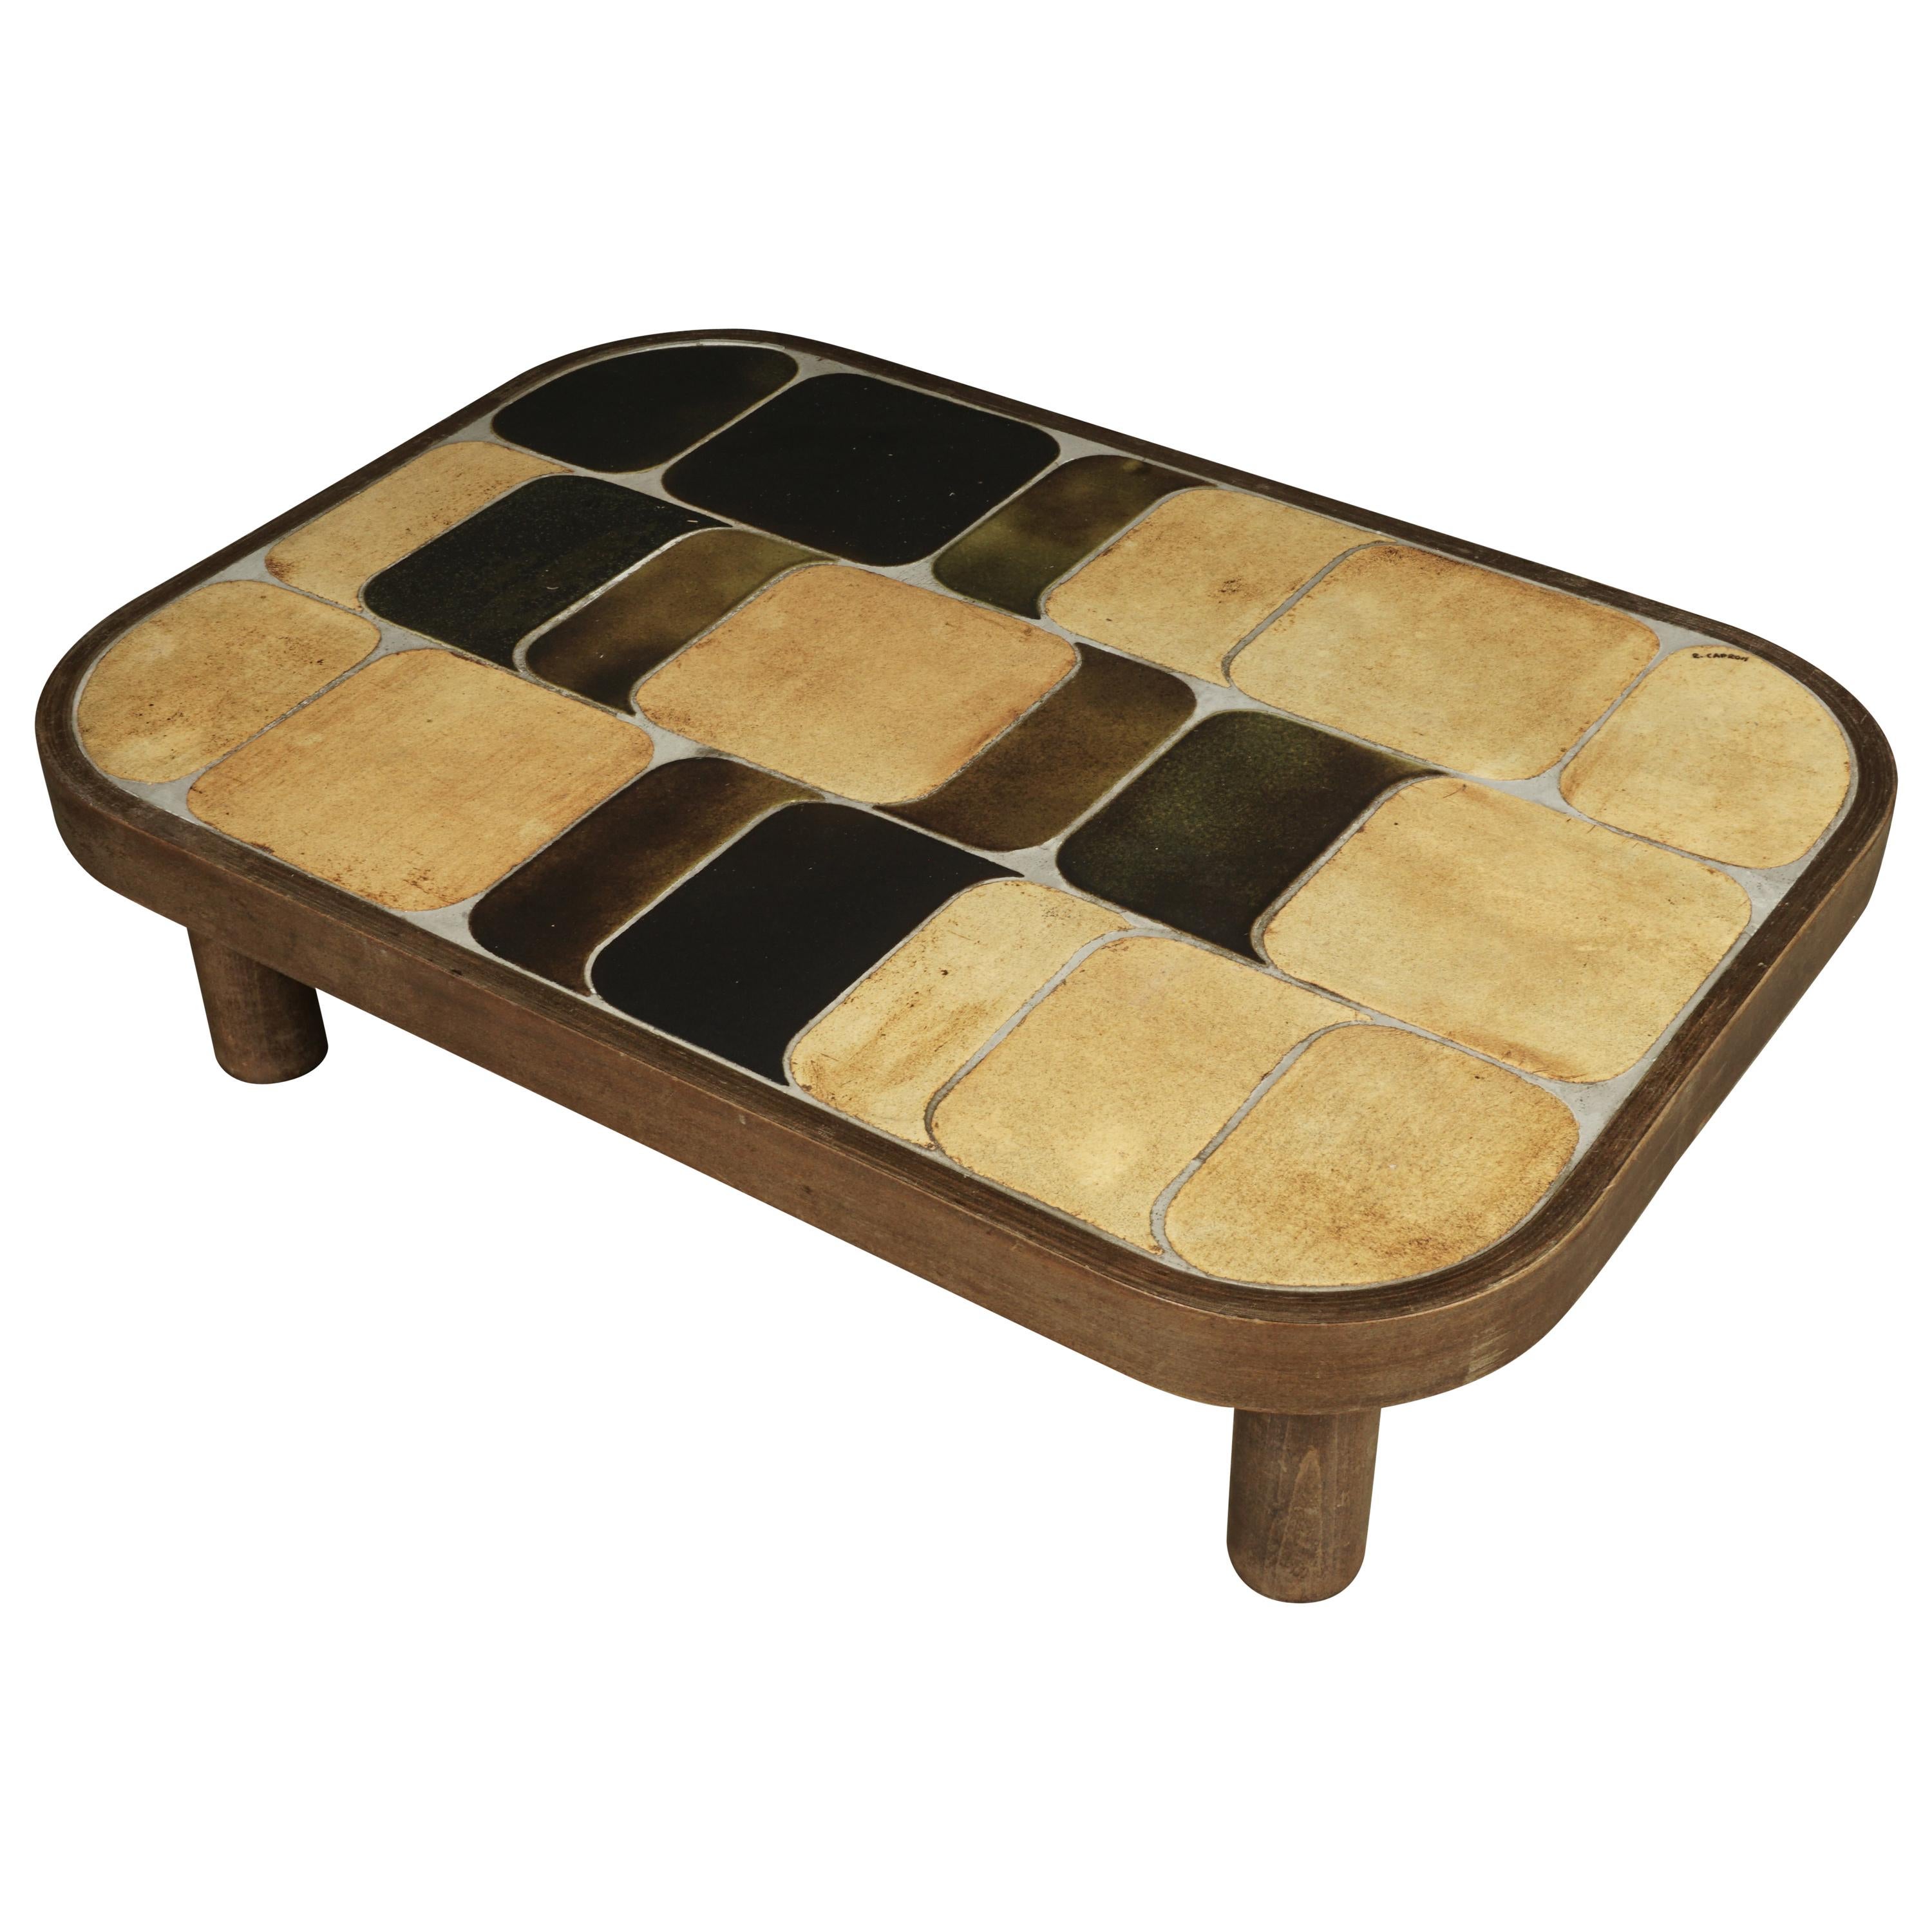 Vintage Mosaic "Shogun" Coffee Table Designed by Roger Capron, France, 1960s